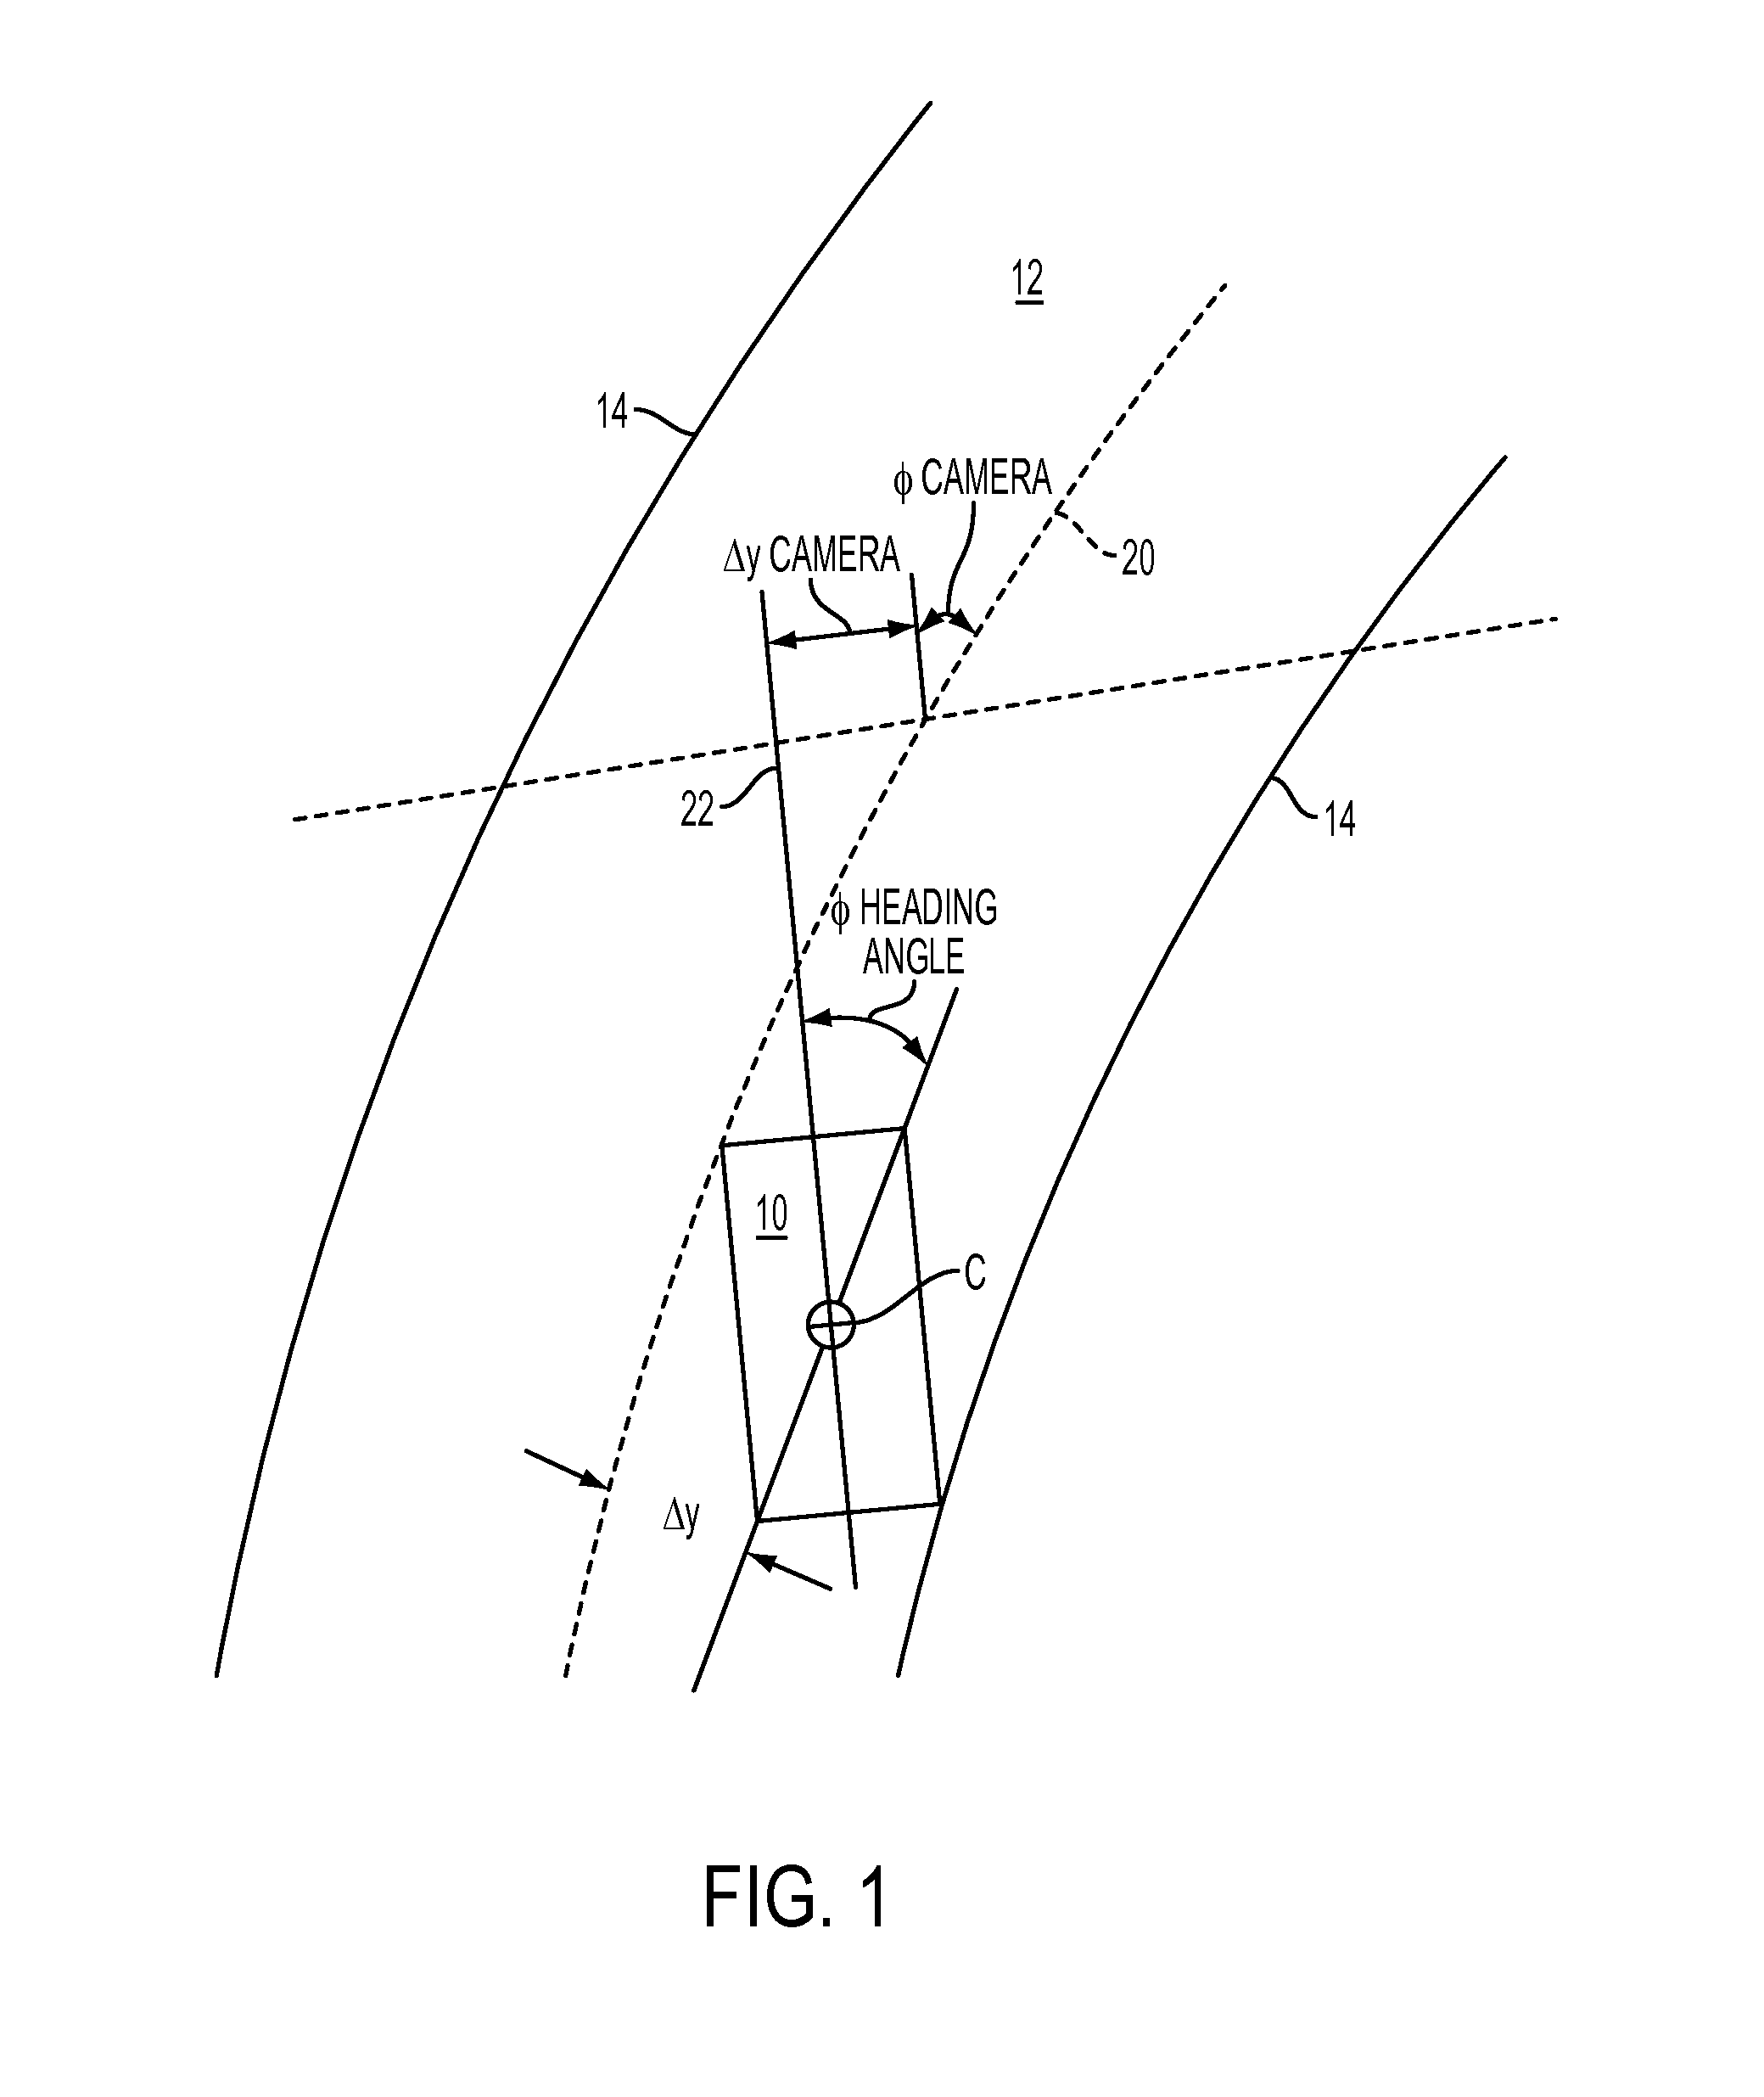 System for providing assist torque based on a vehicle state